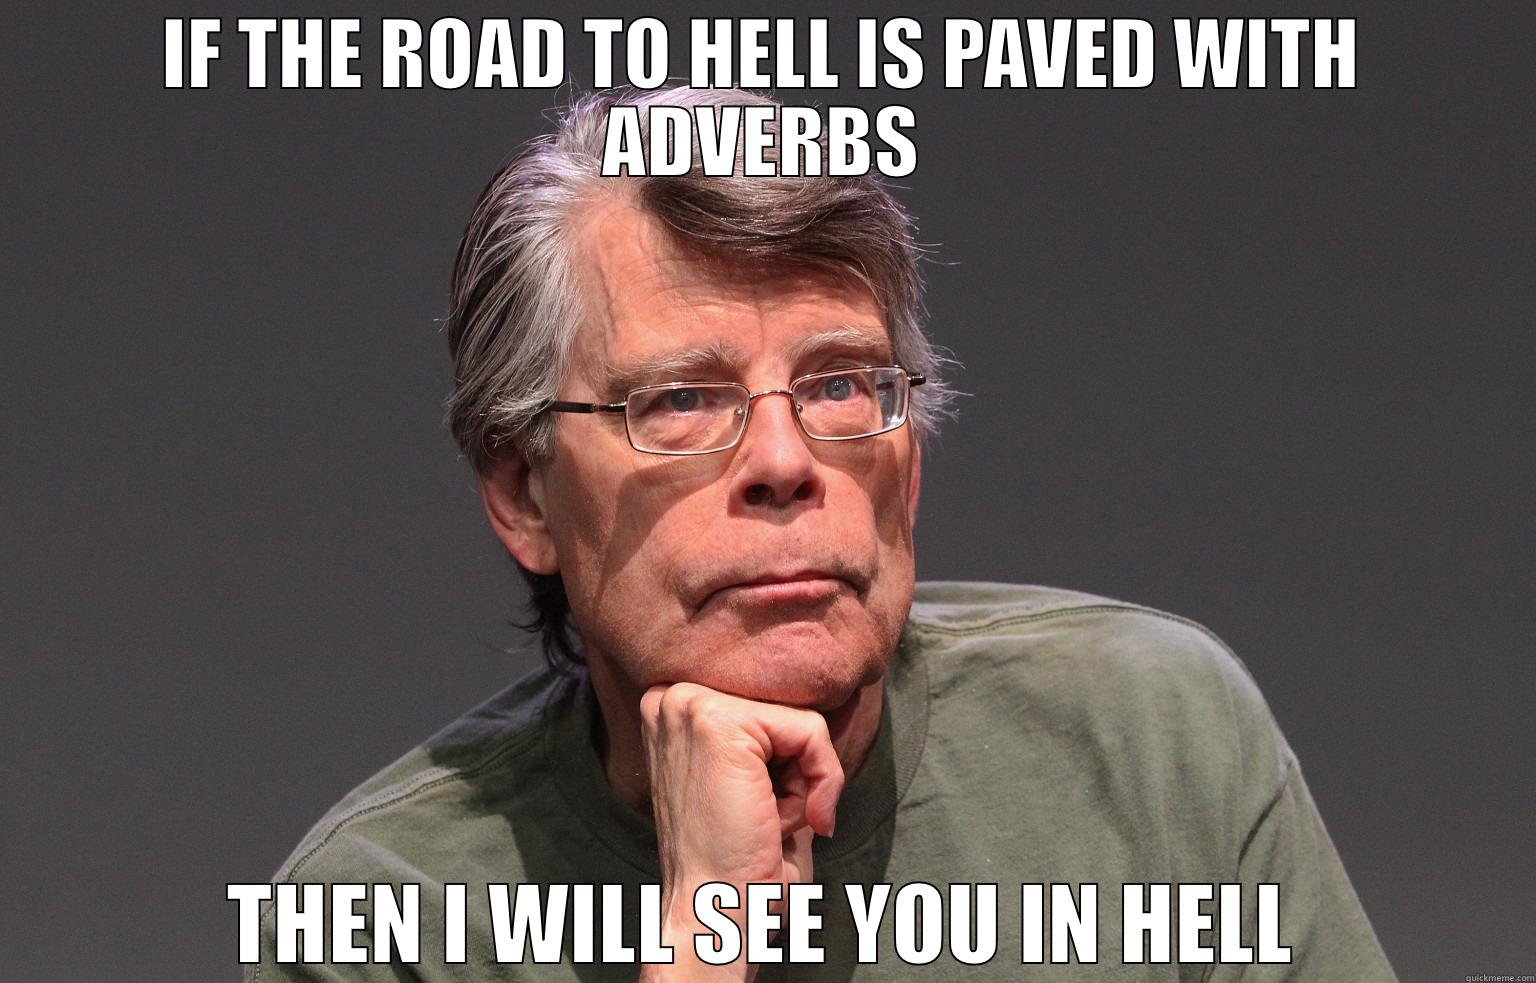 the road to hell is not paved with adverbs